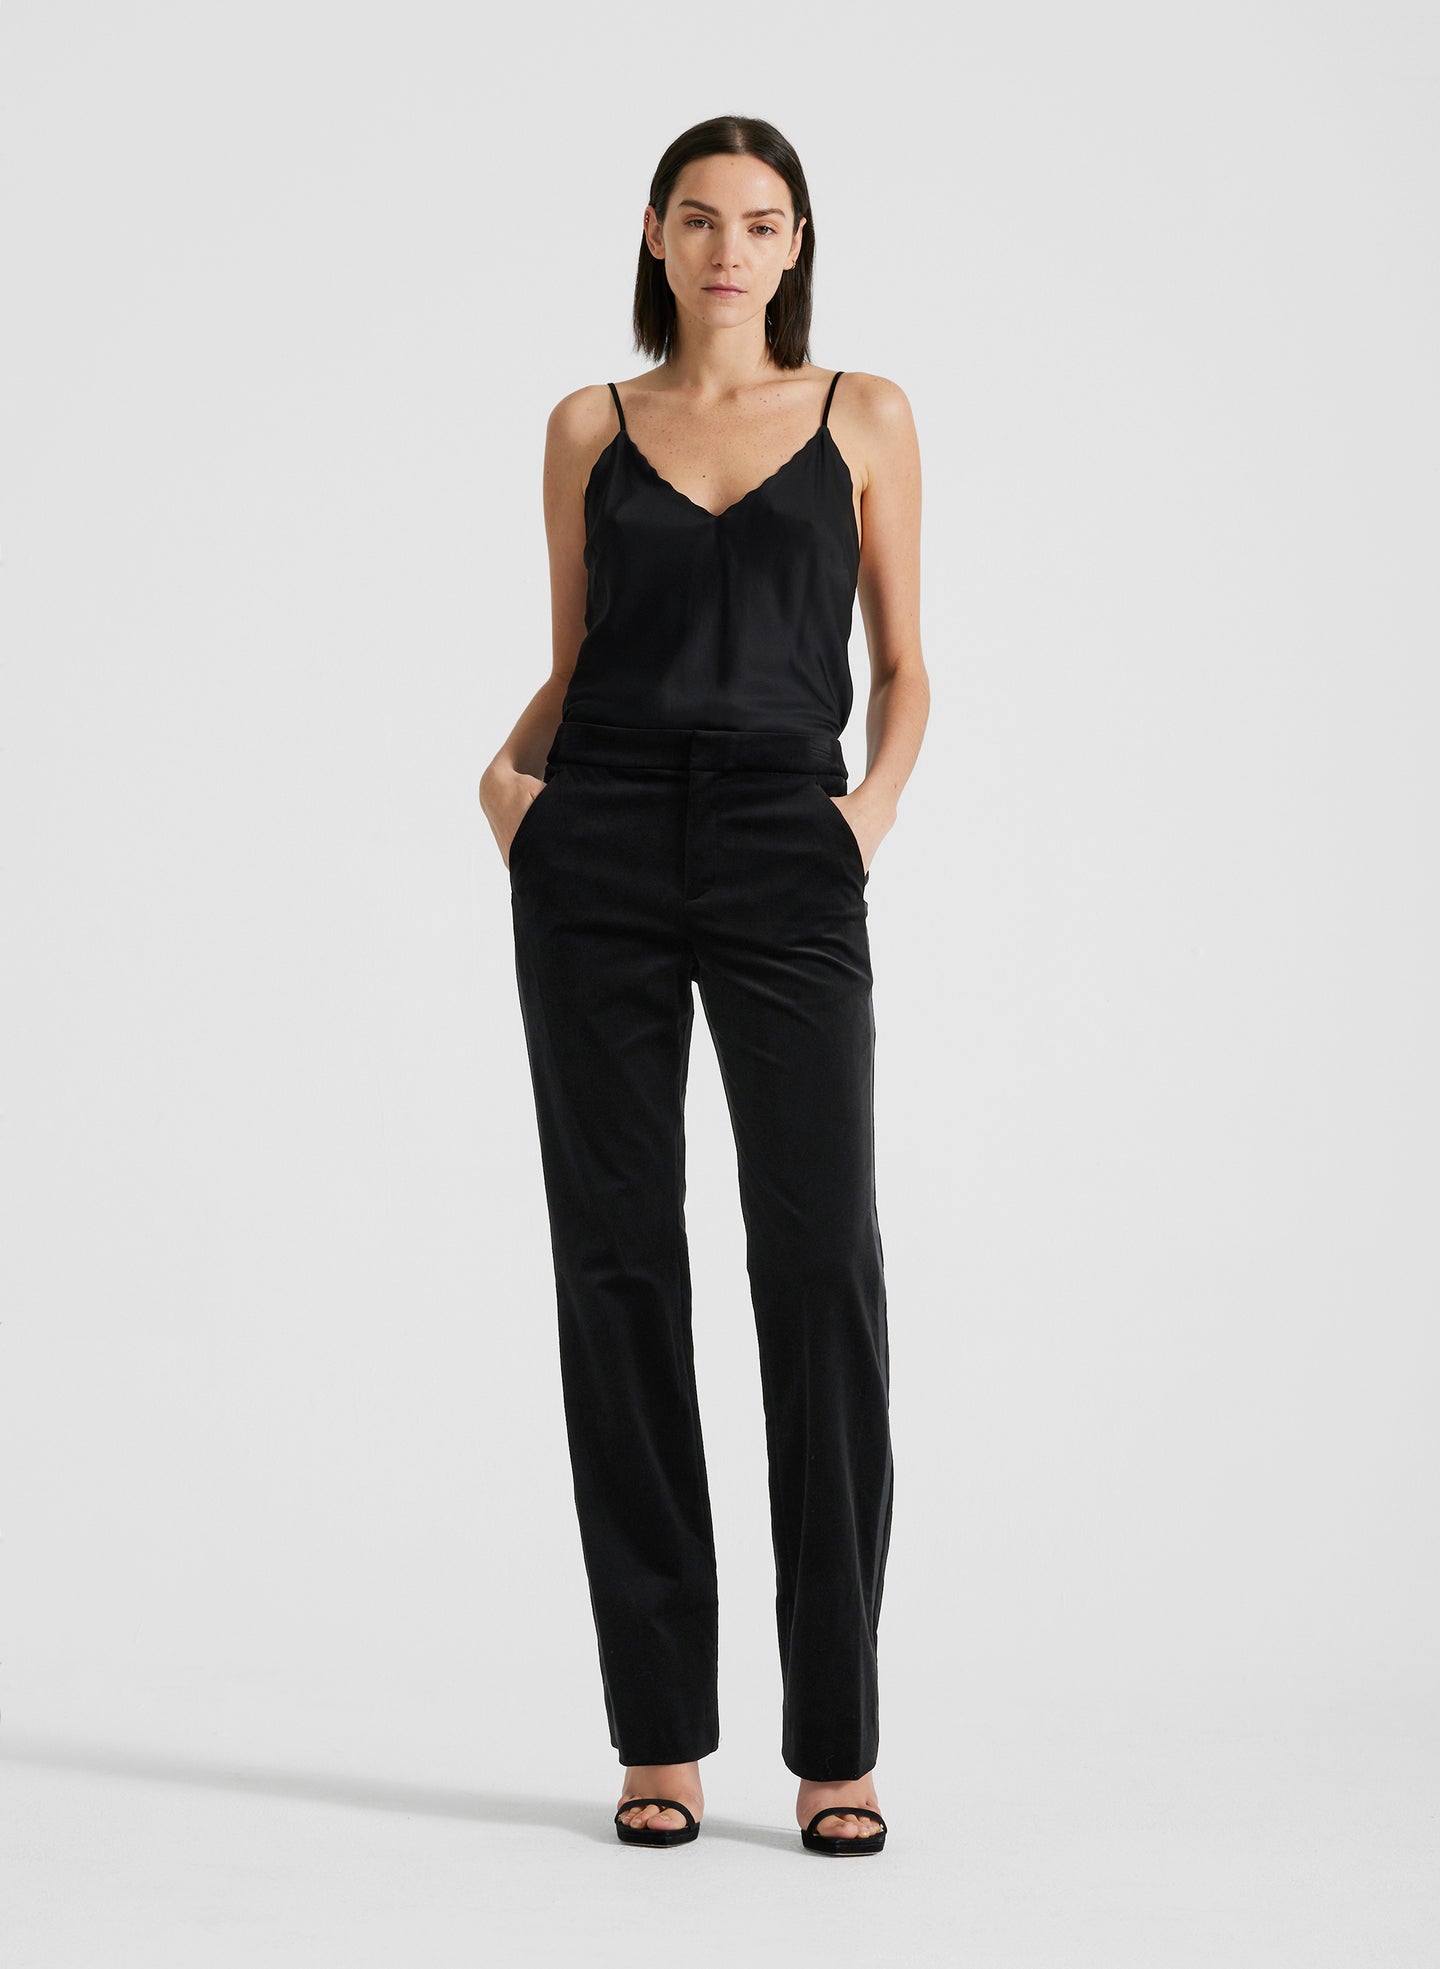 front view of woman wearing black satin camisole and black velvet pants